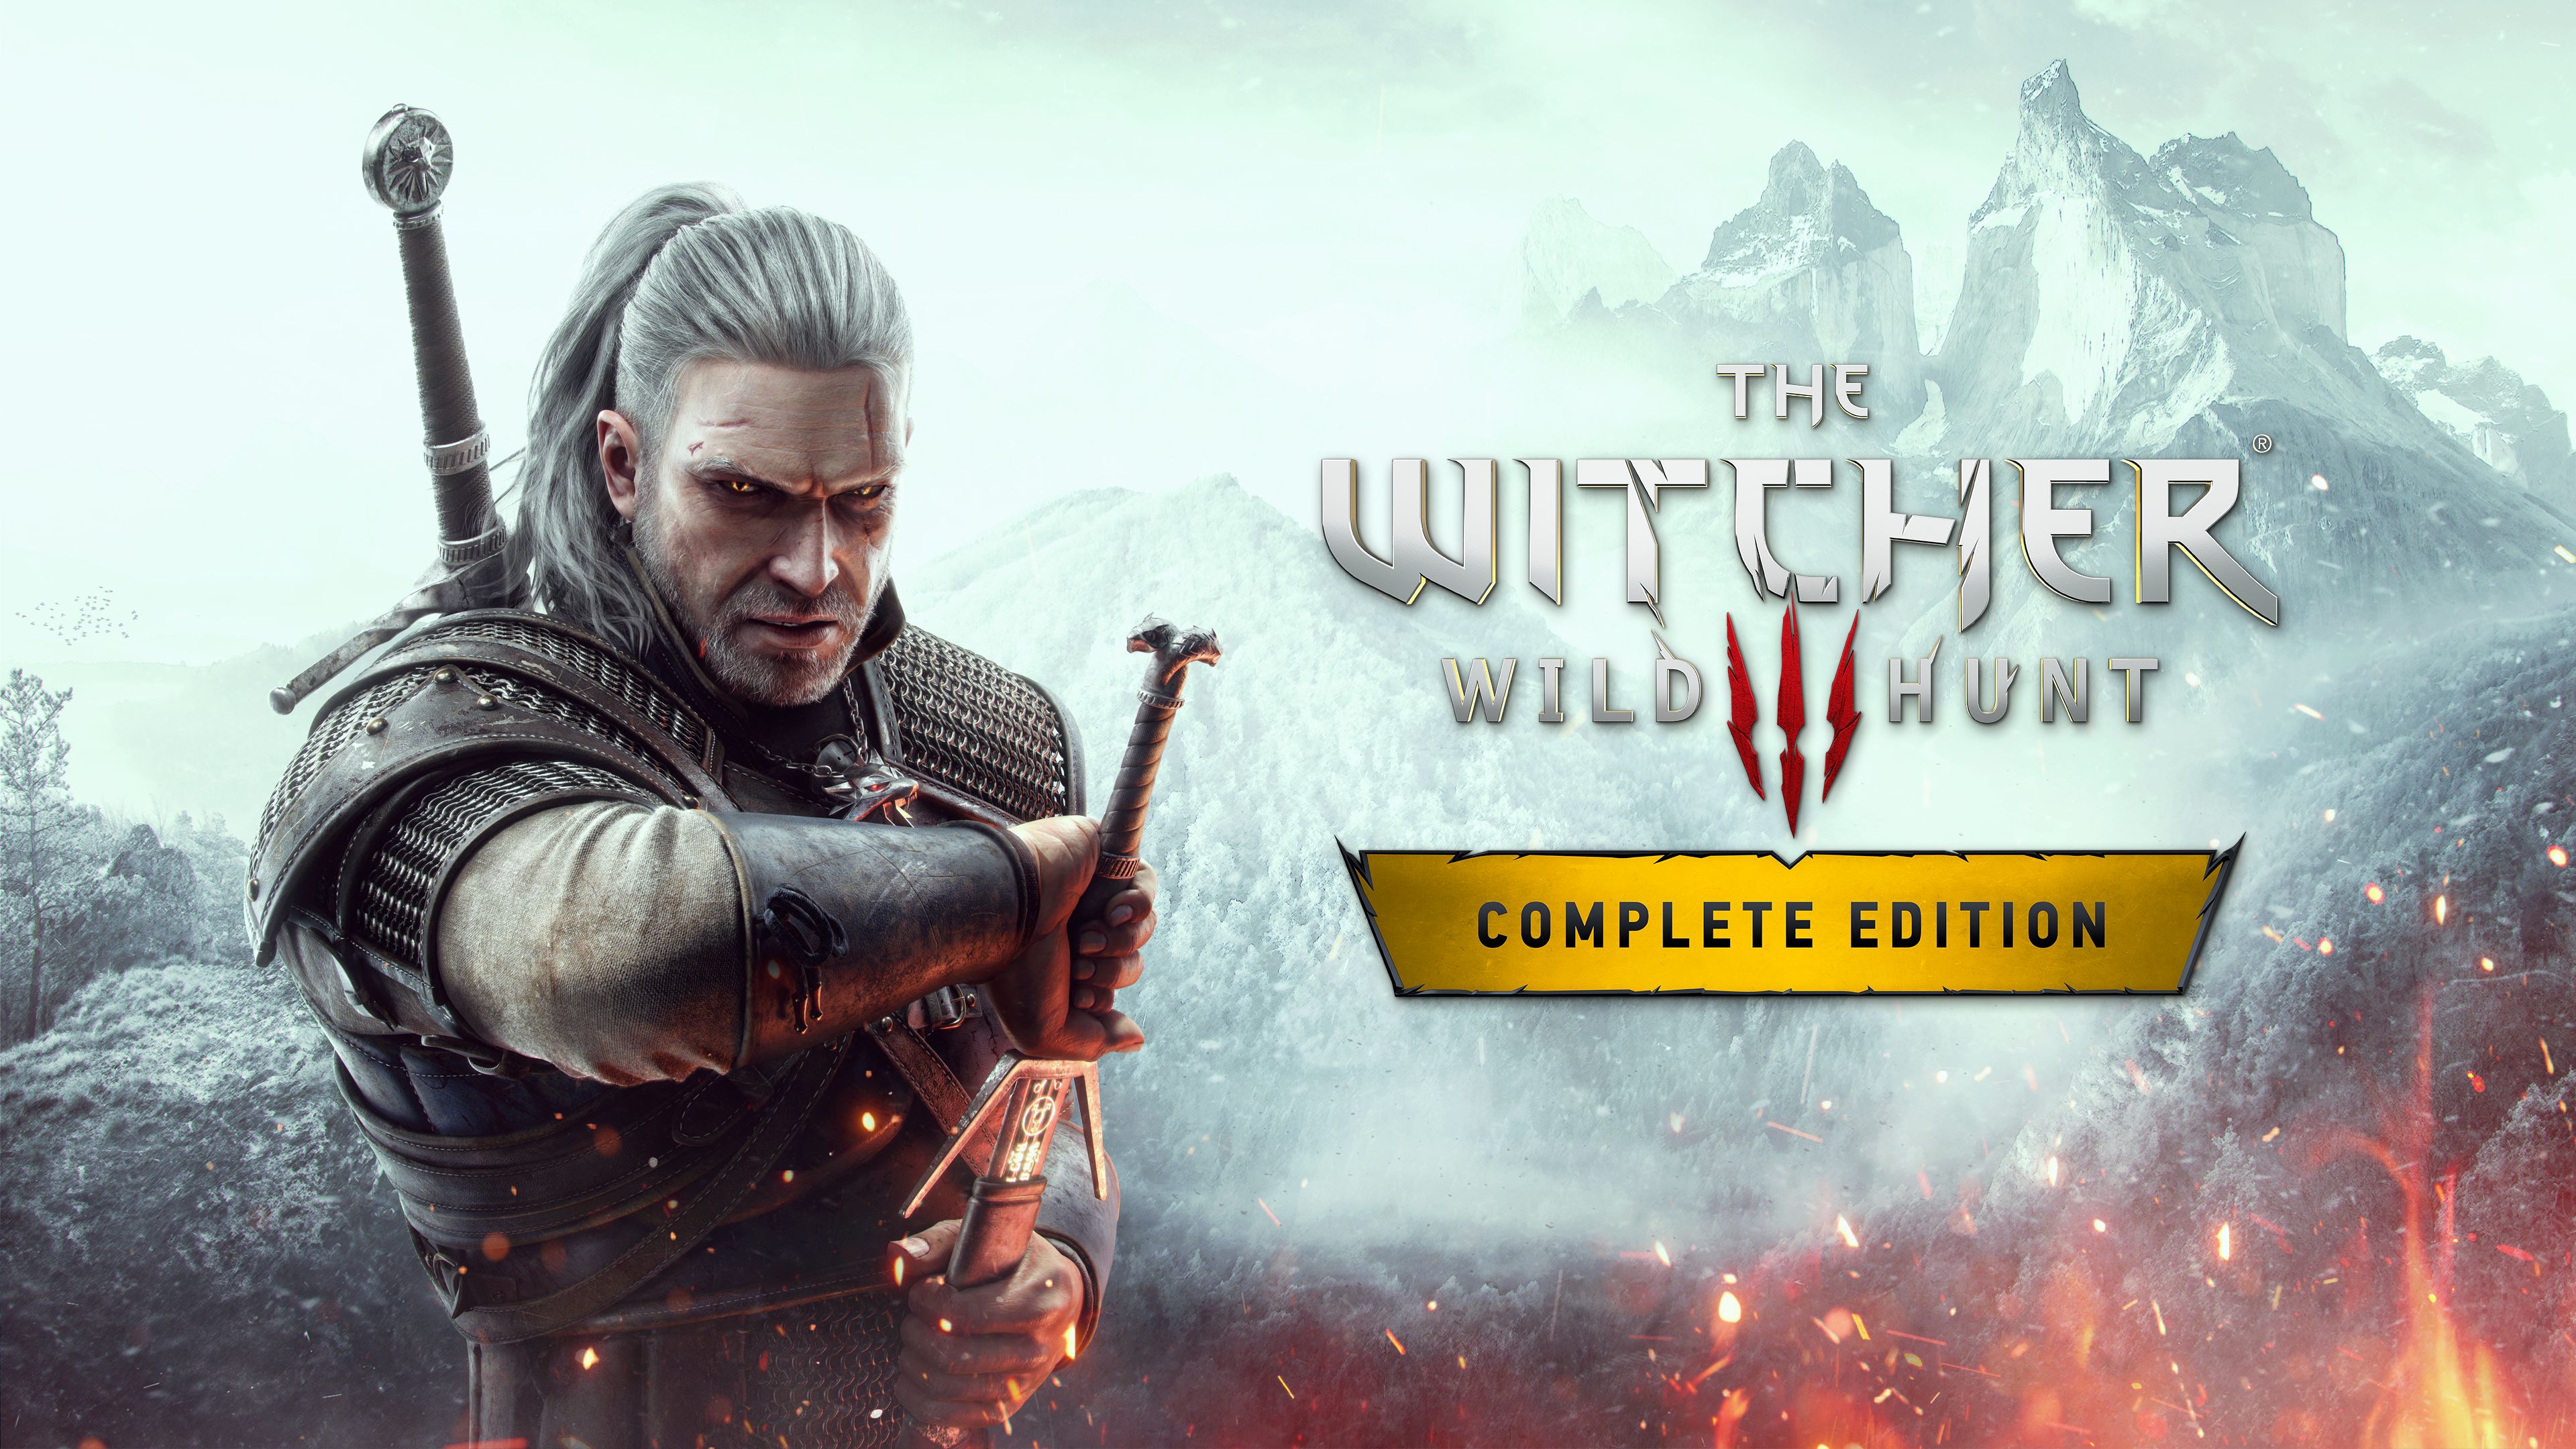 The Witcher 3: Wild Hunt – Game of the Year Edition (English, Korean, Traditional Chinese)